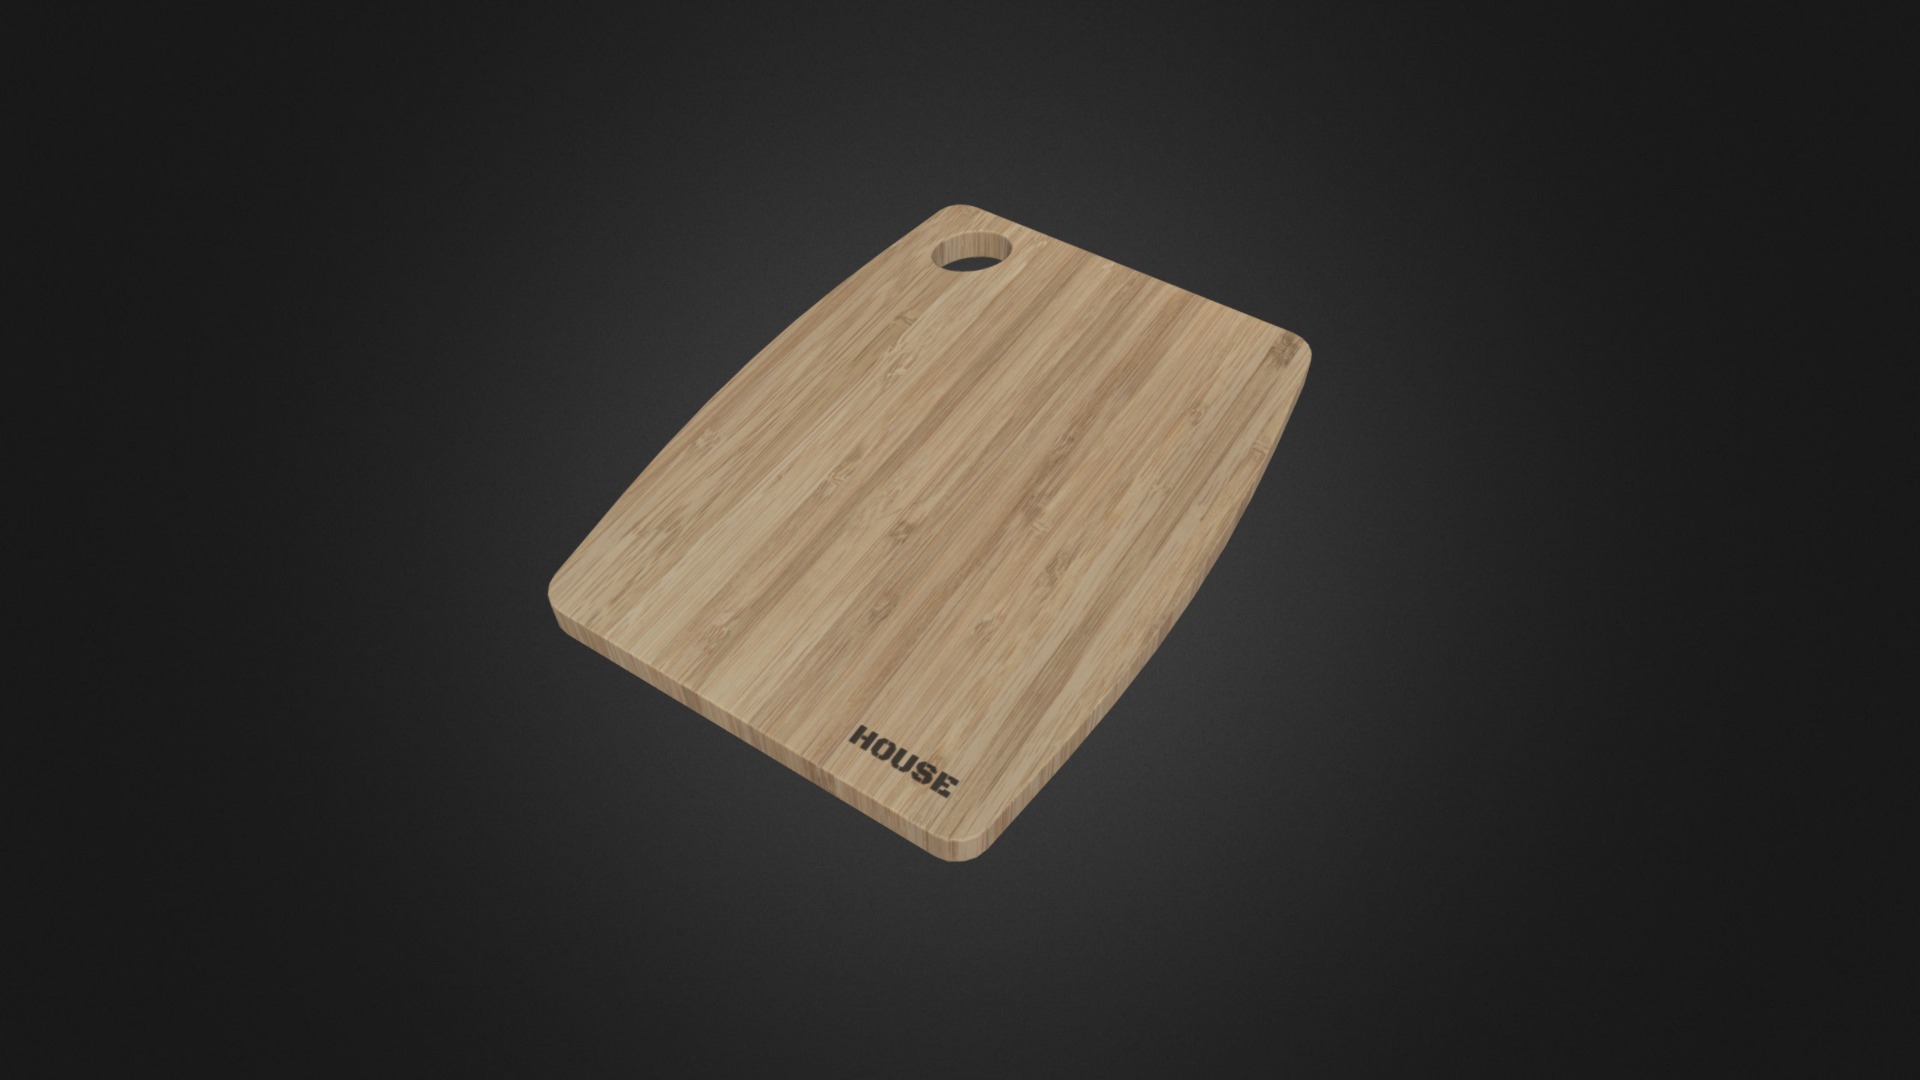 3D model Chopping board - This is a 3D model of the Chopping board. The 3D model is about a wooden block with a black background.